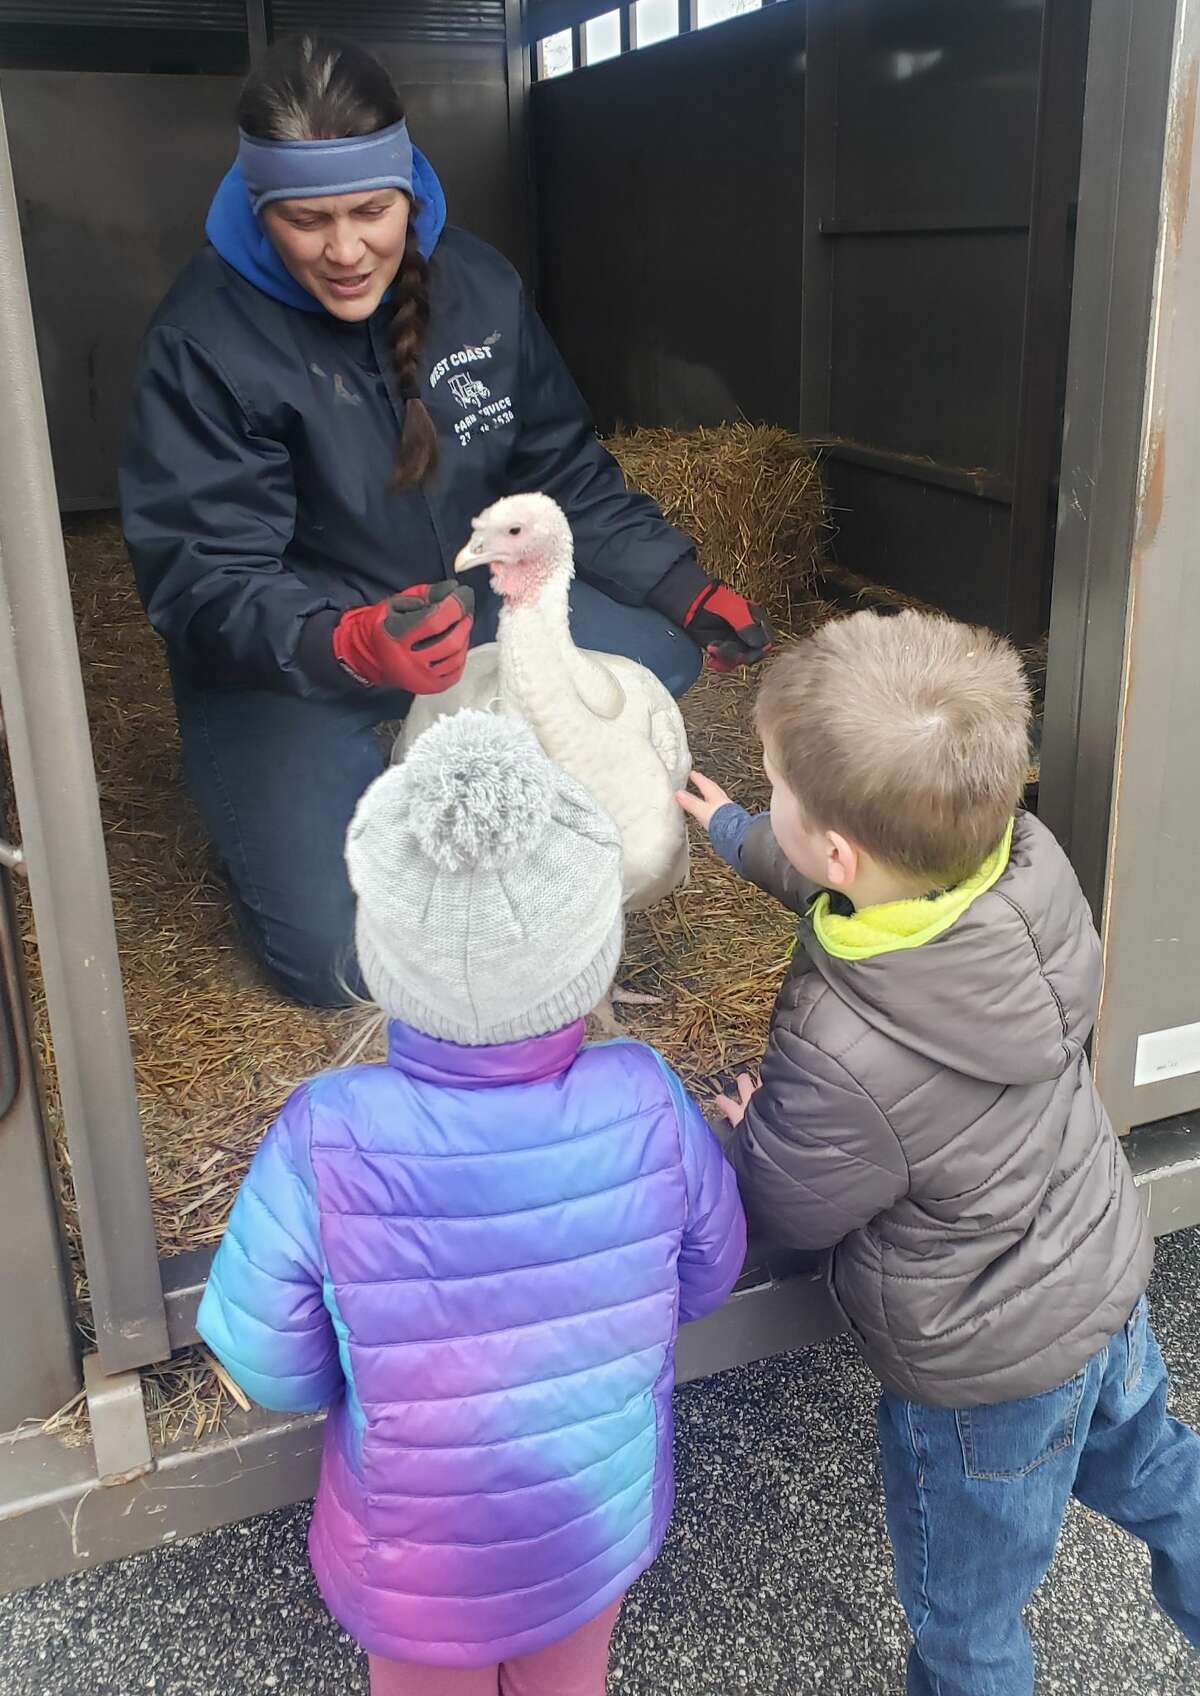 Elaine Bossingham, owner of Country View Farms in Manistee, lets Trinity Lutheran School students pet a turkey on Thursday.